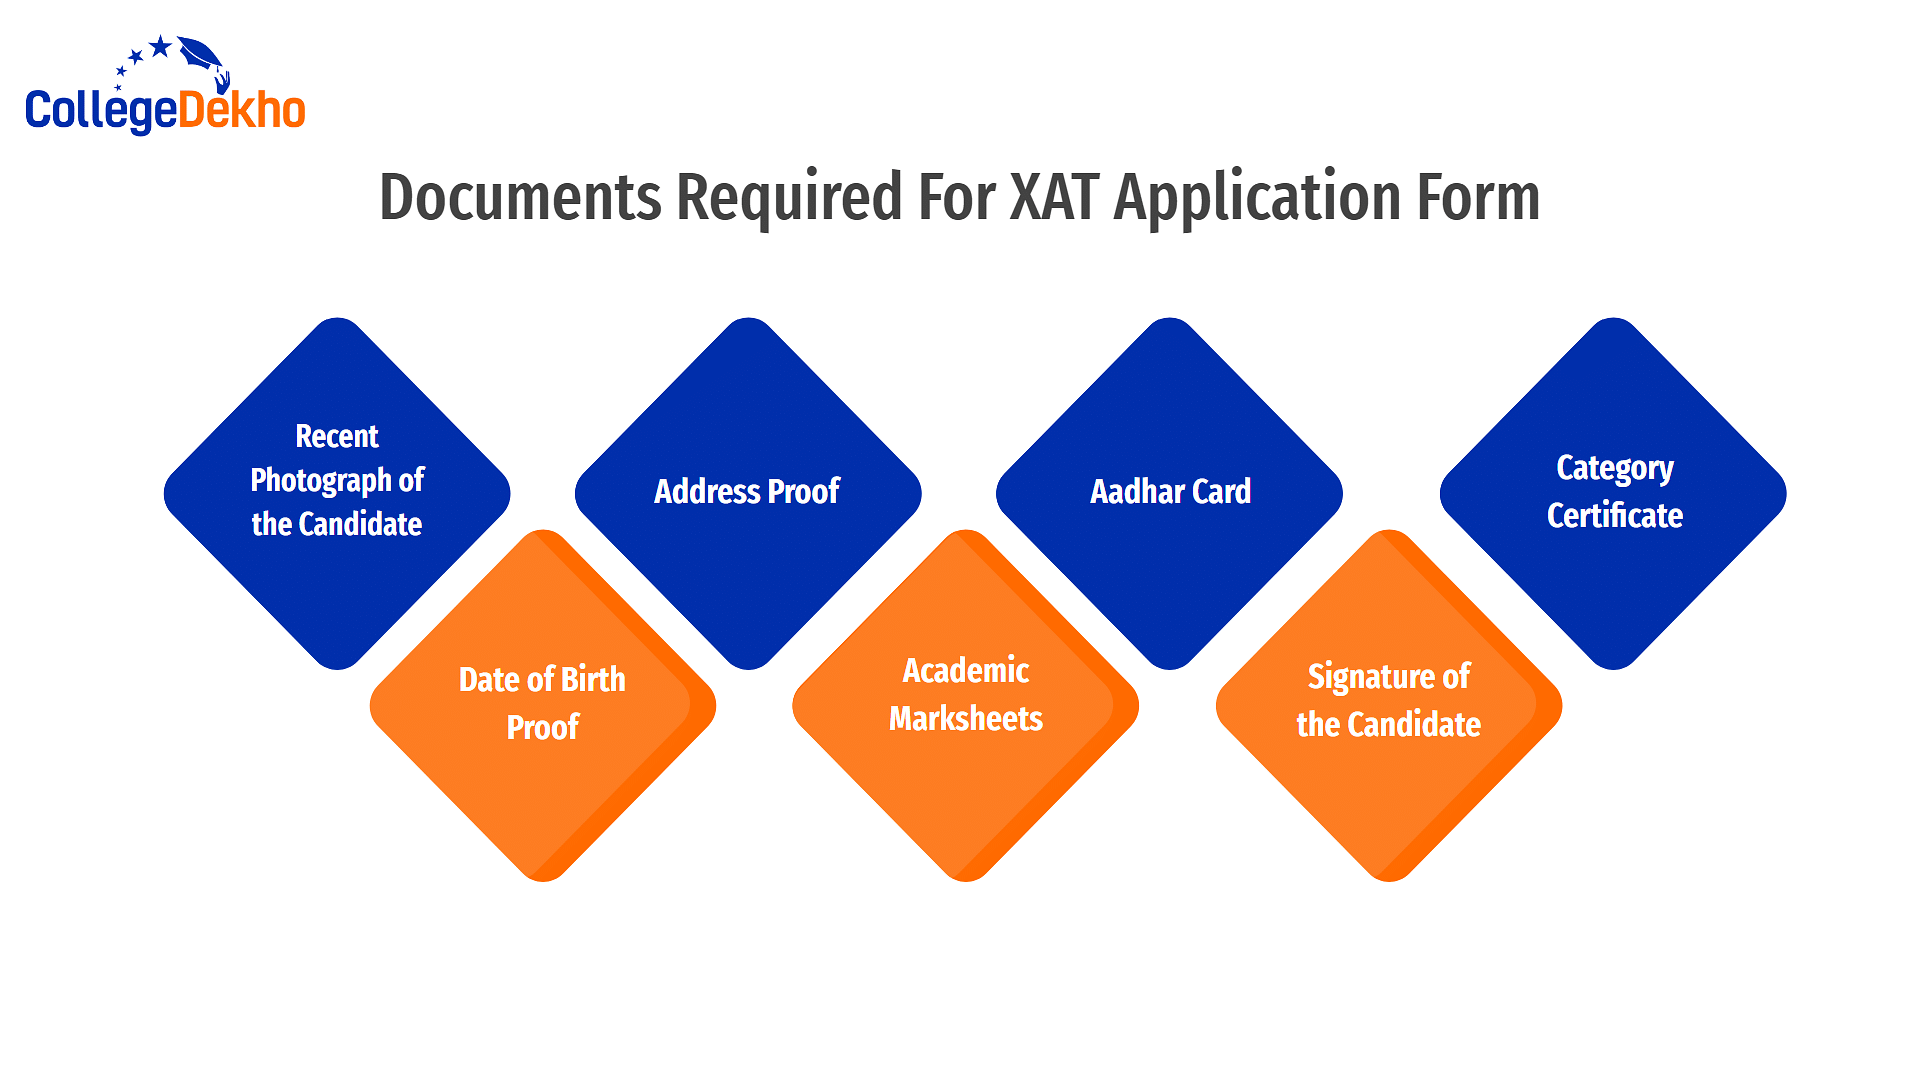 Documents Required For XAT Application Form